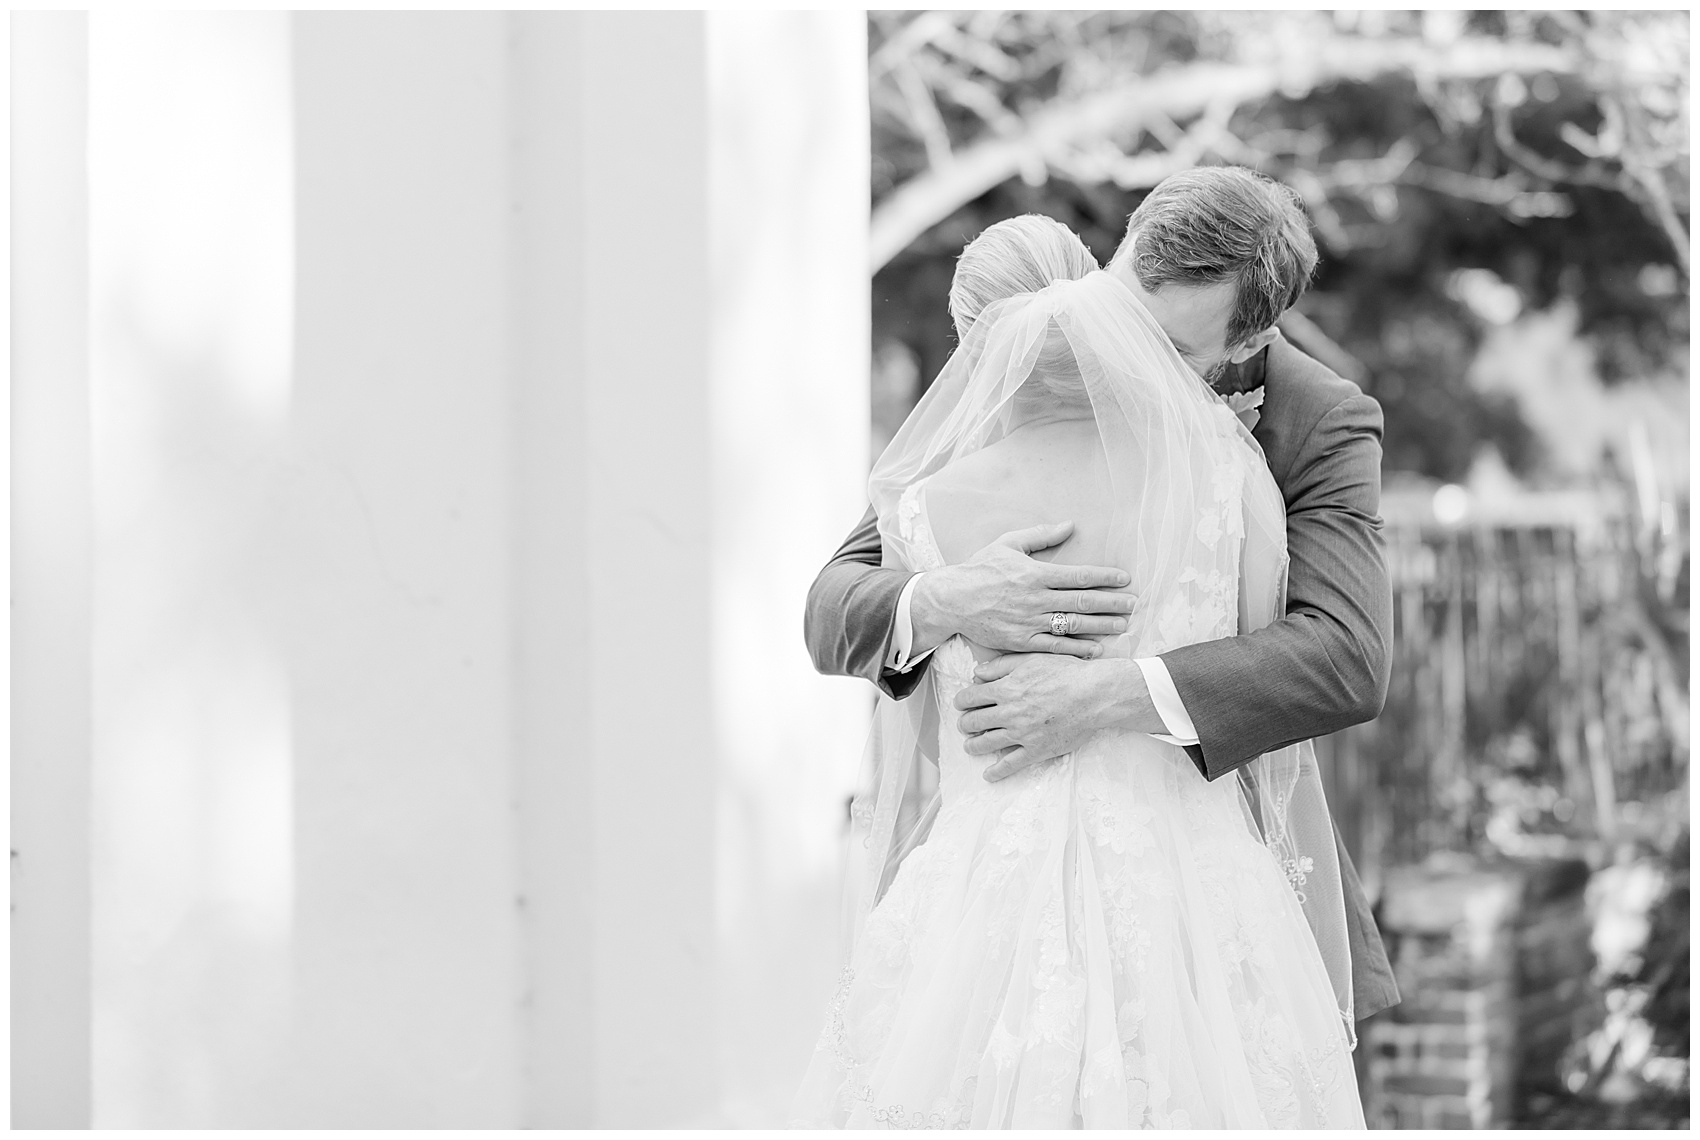 an intimate moment between the bride and groom at their first look